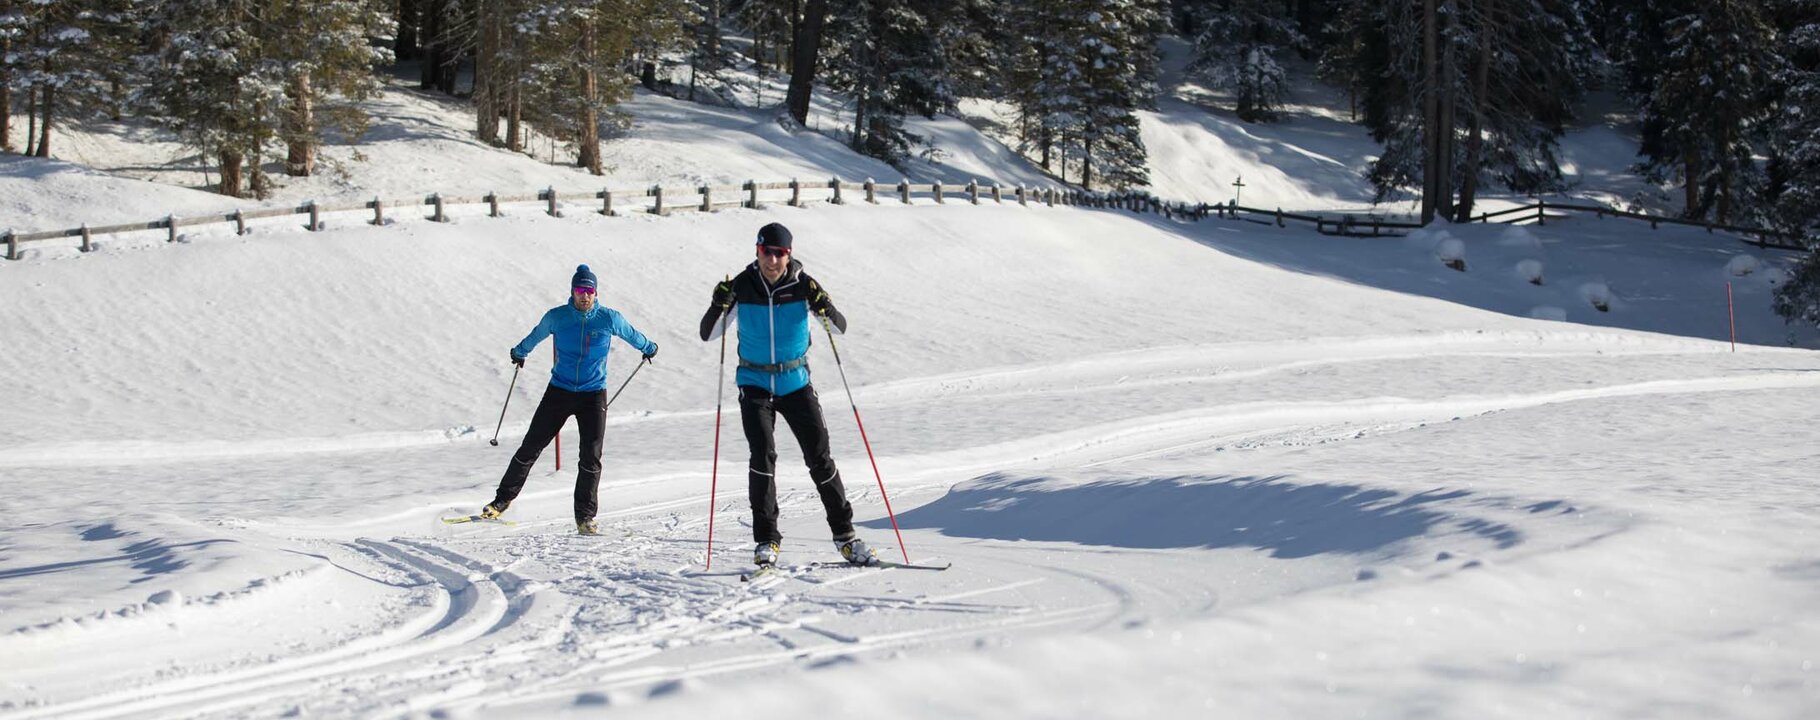 Cross-country skiing on the many cross-country trails in Serfaus-Fiss-Ladis in Tyrol  | © Serfaus-Fiss-Ladis Marketing GmbH | Andreas Kirschner 